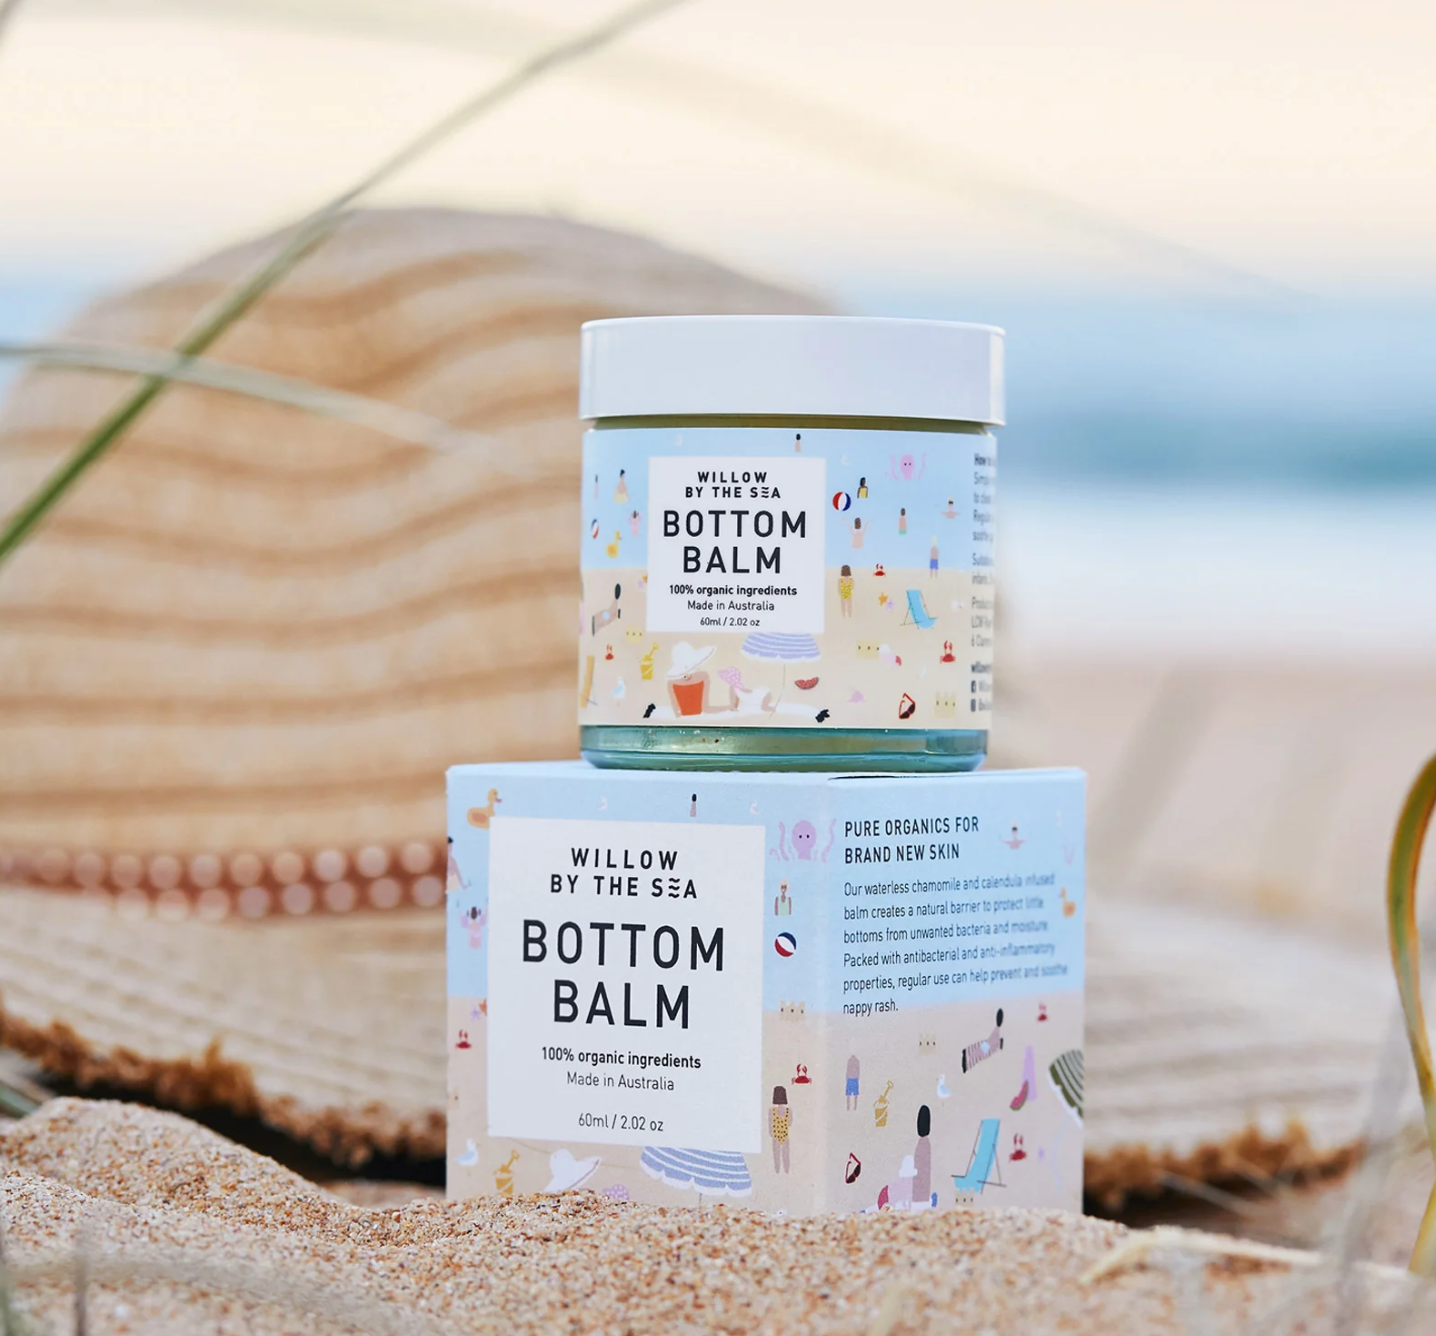 Willow by Sea - Bottom Balm